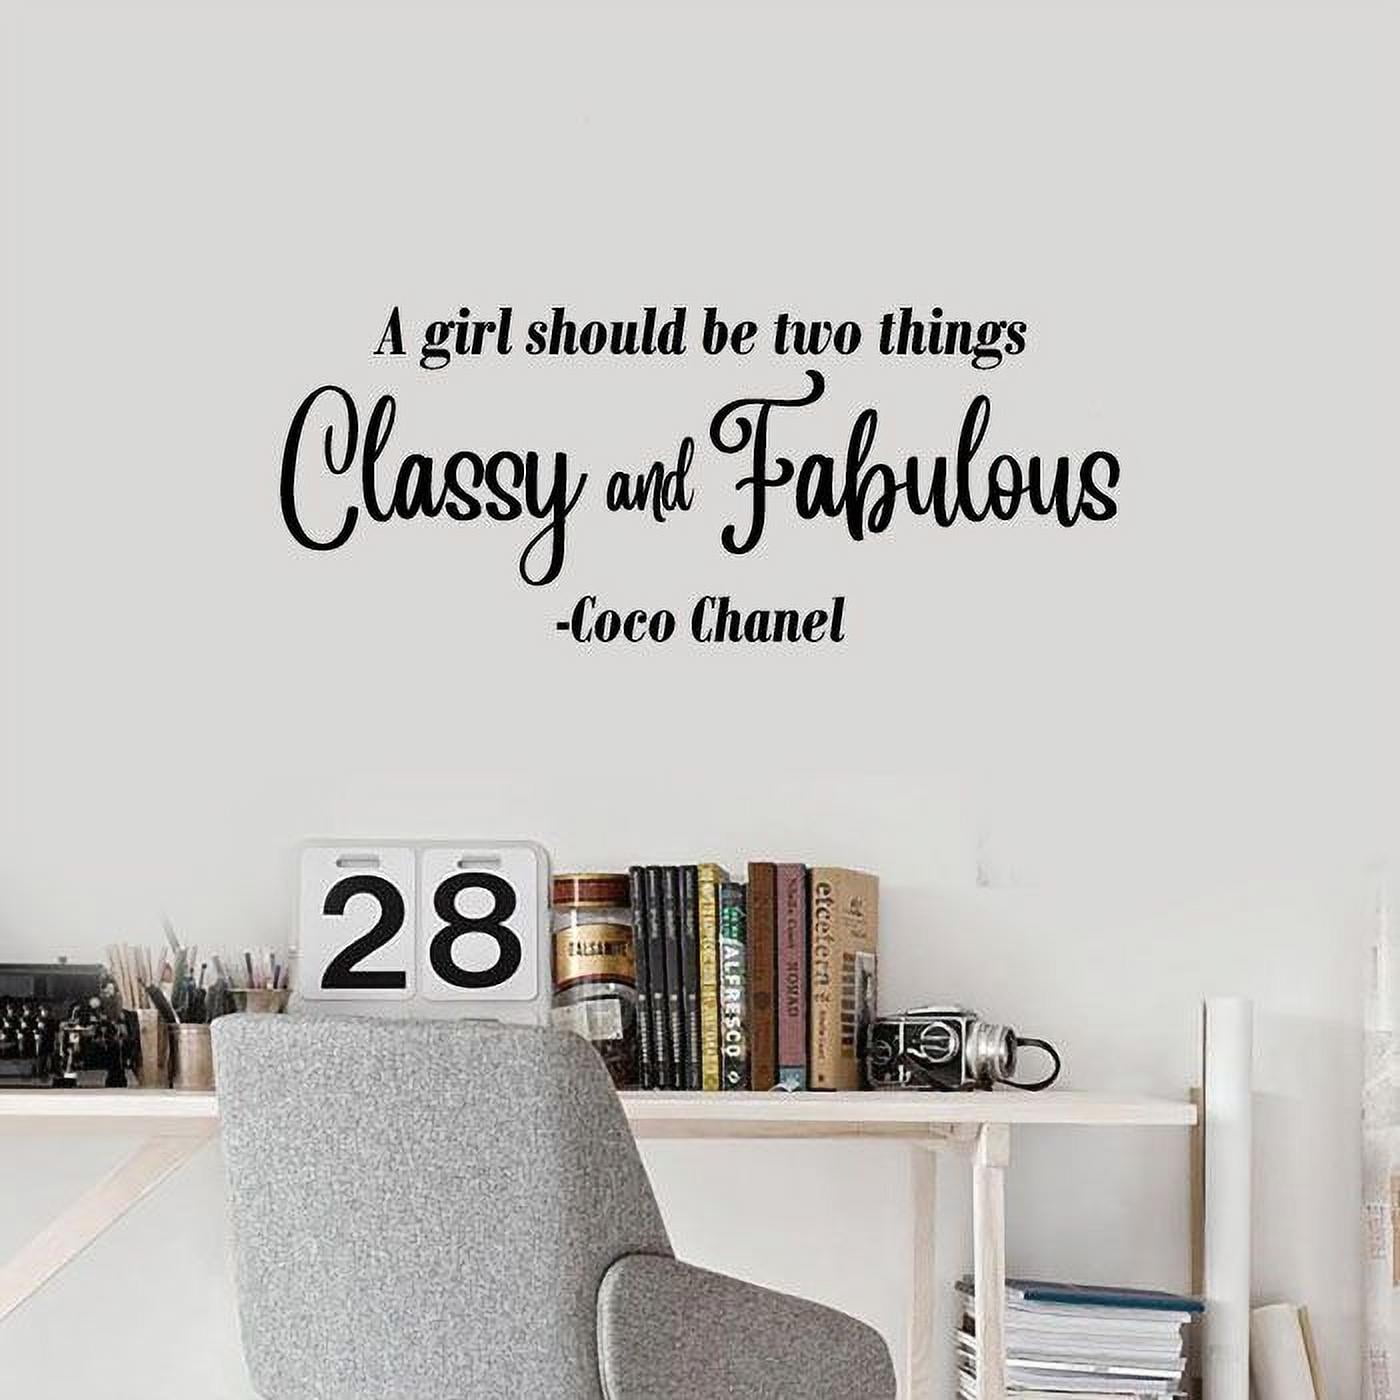 coco chanel sayings about fashion